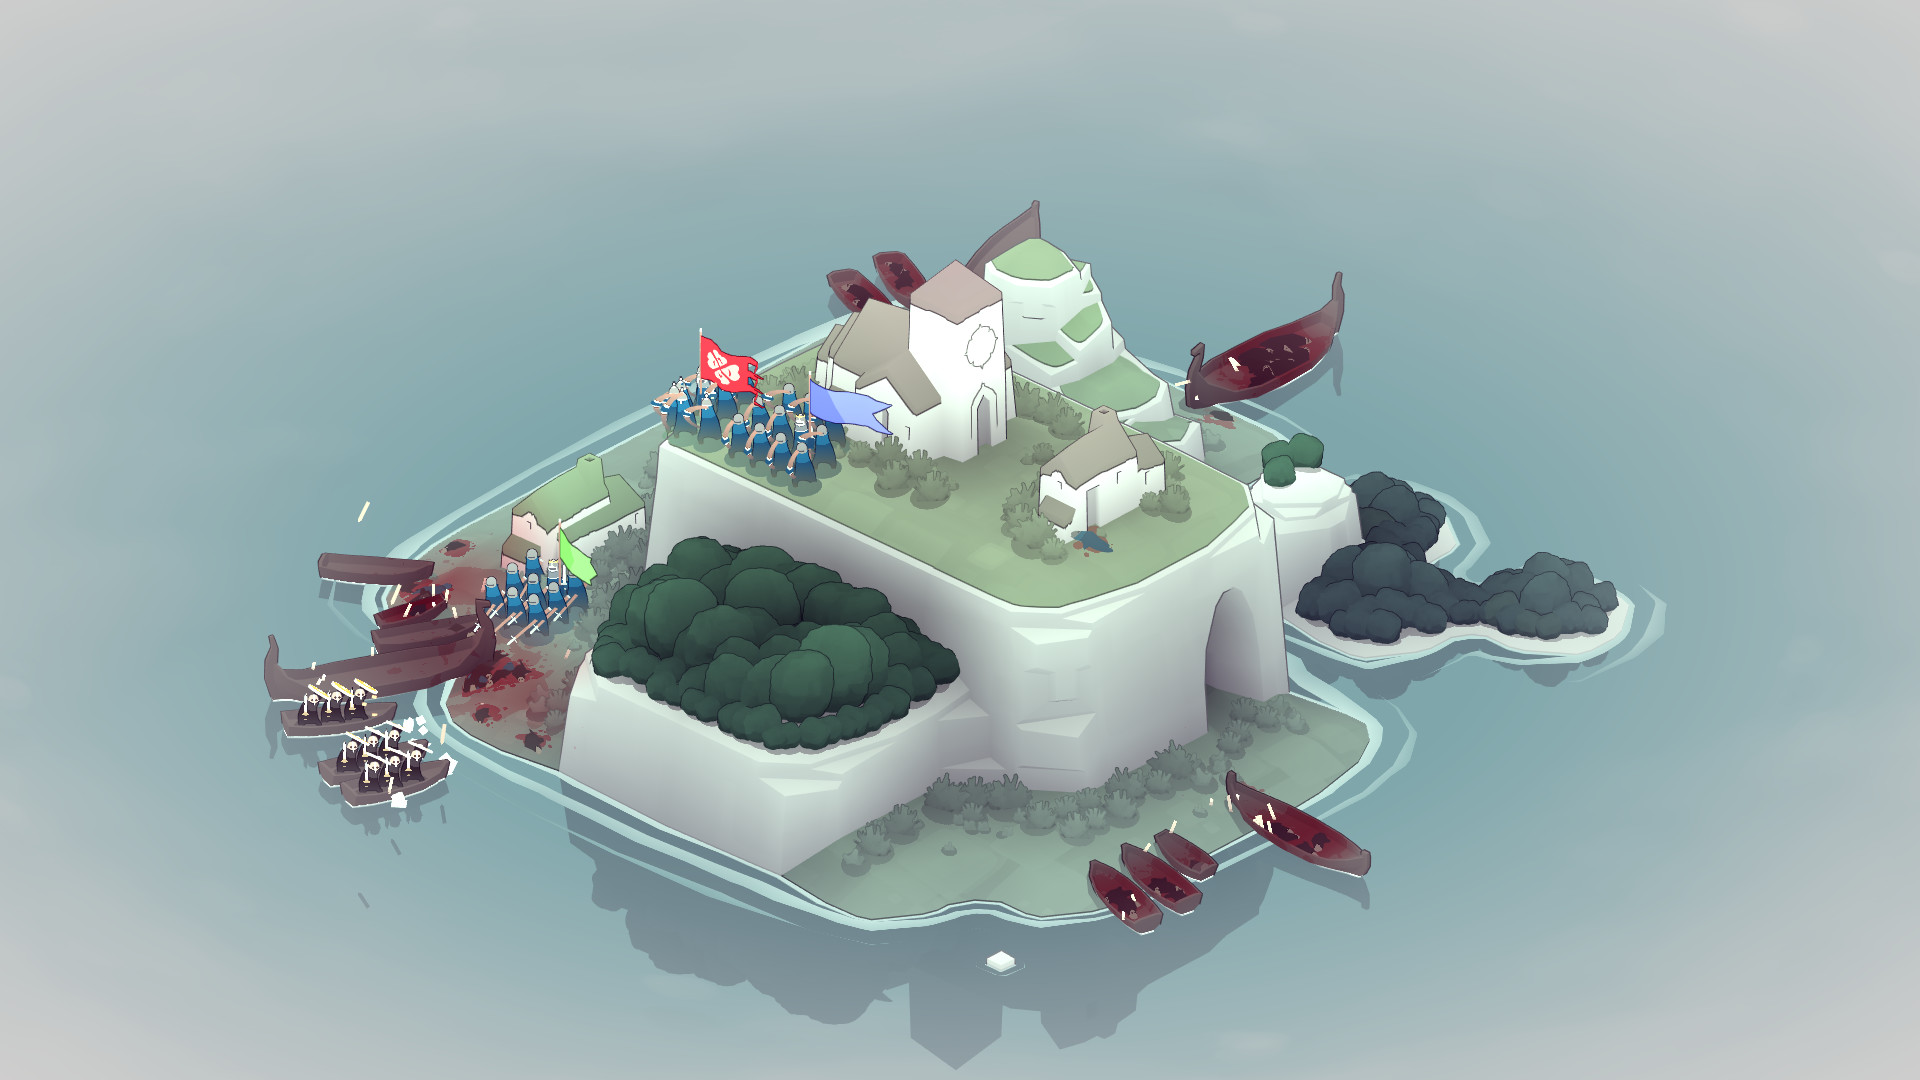 Best mobile strategy games: Bad North. Image shows an island wih various groups of people on it.